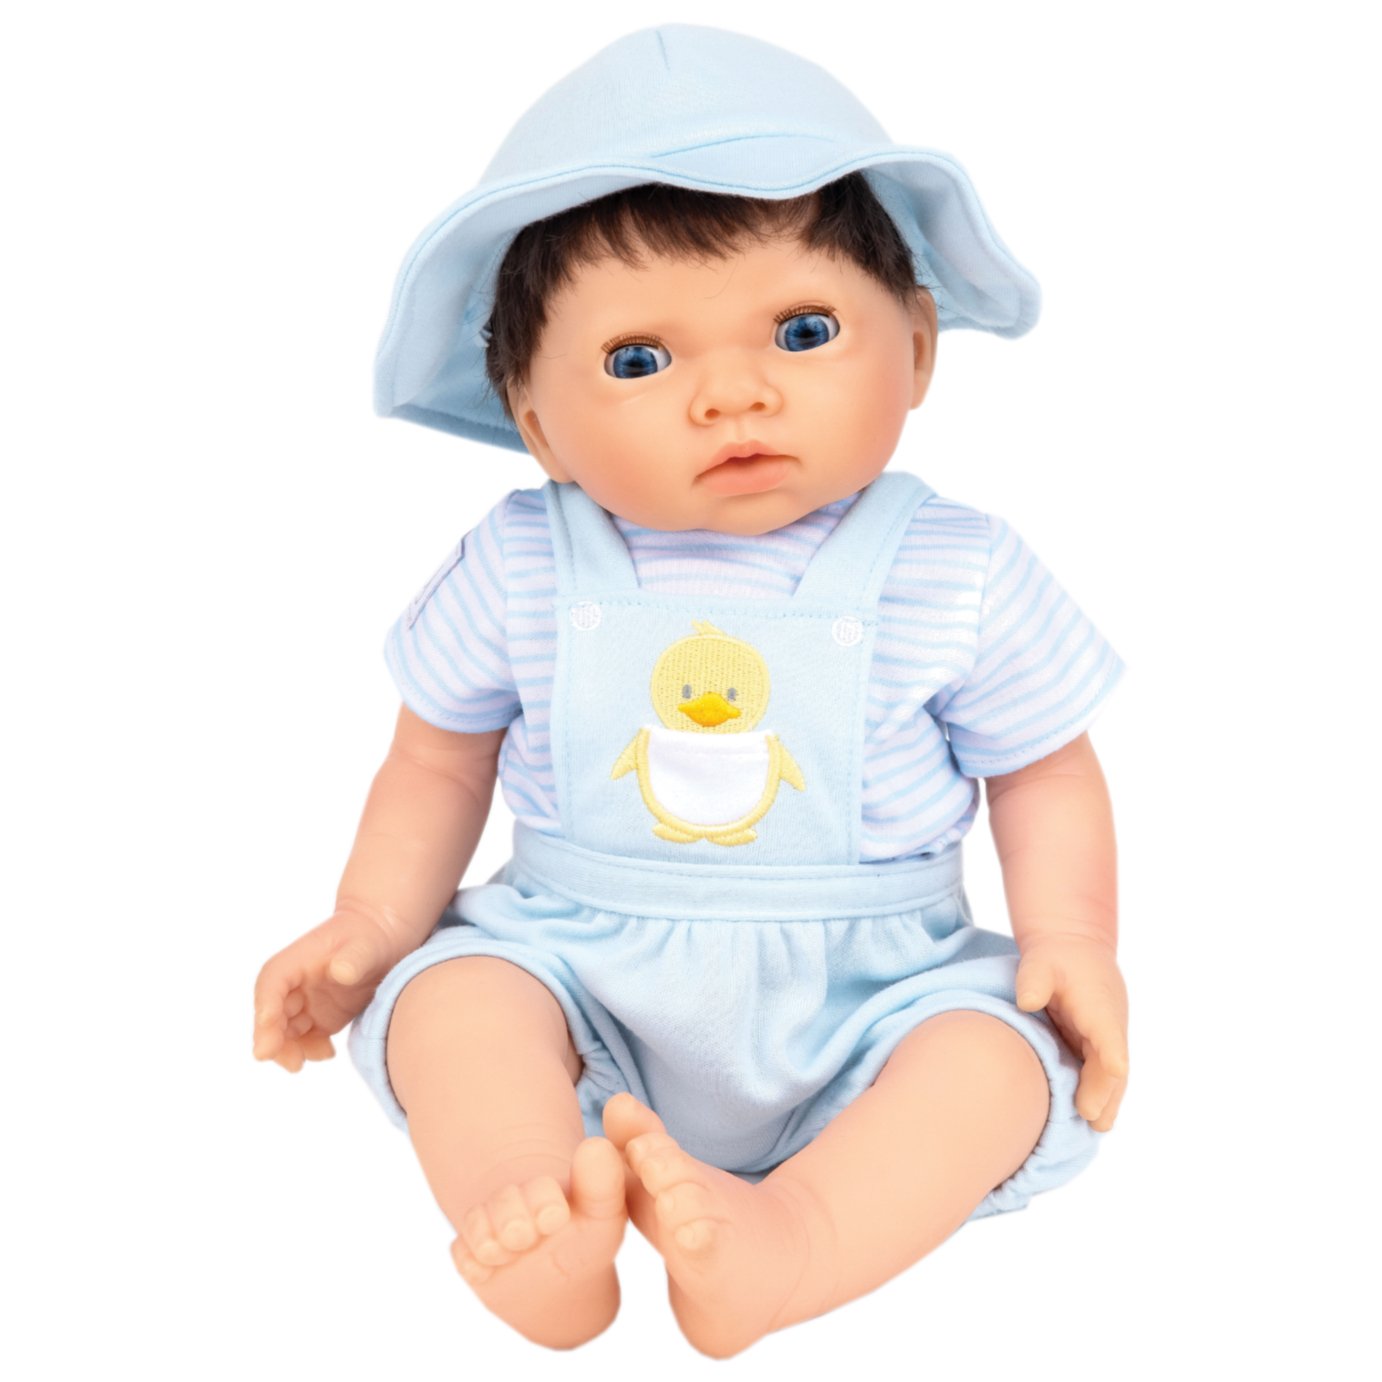 Tiny Treasures Ducky Dolls Outfit review